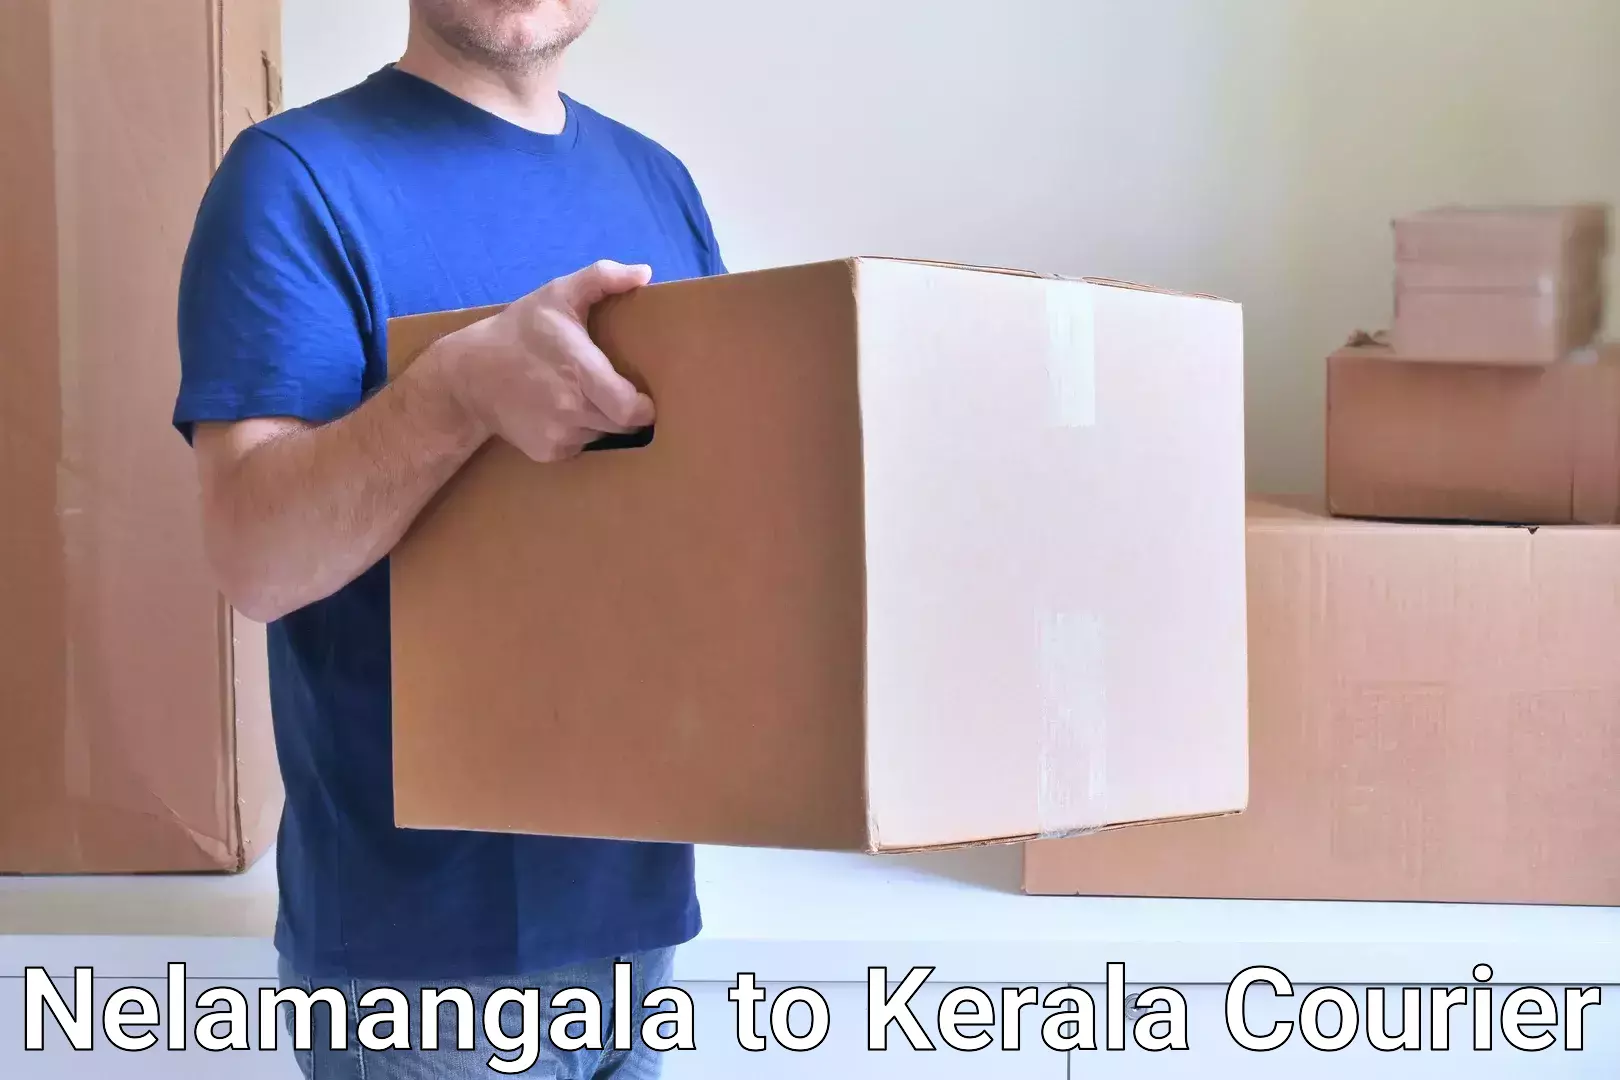 Personal courier services Nelamangala to Trivandrum